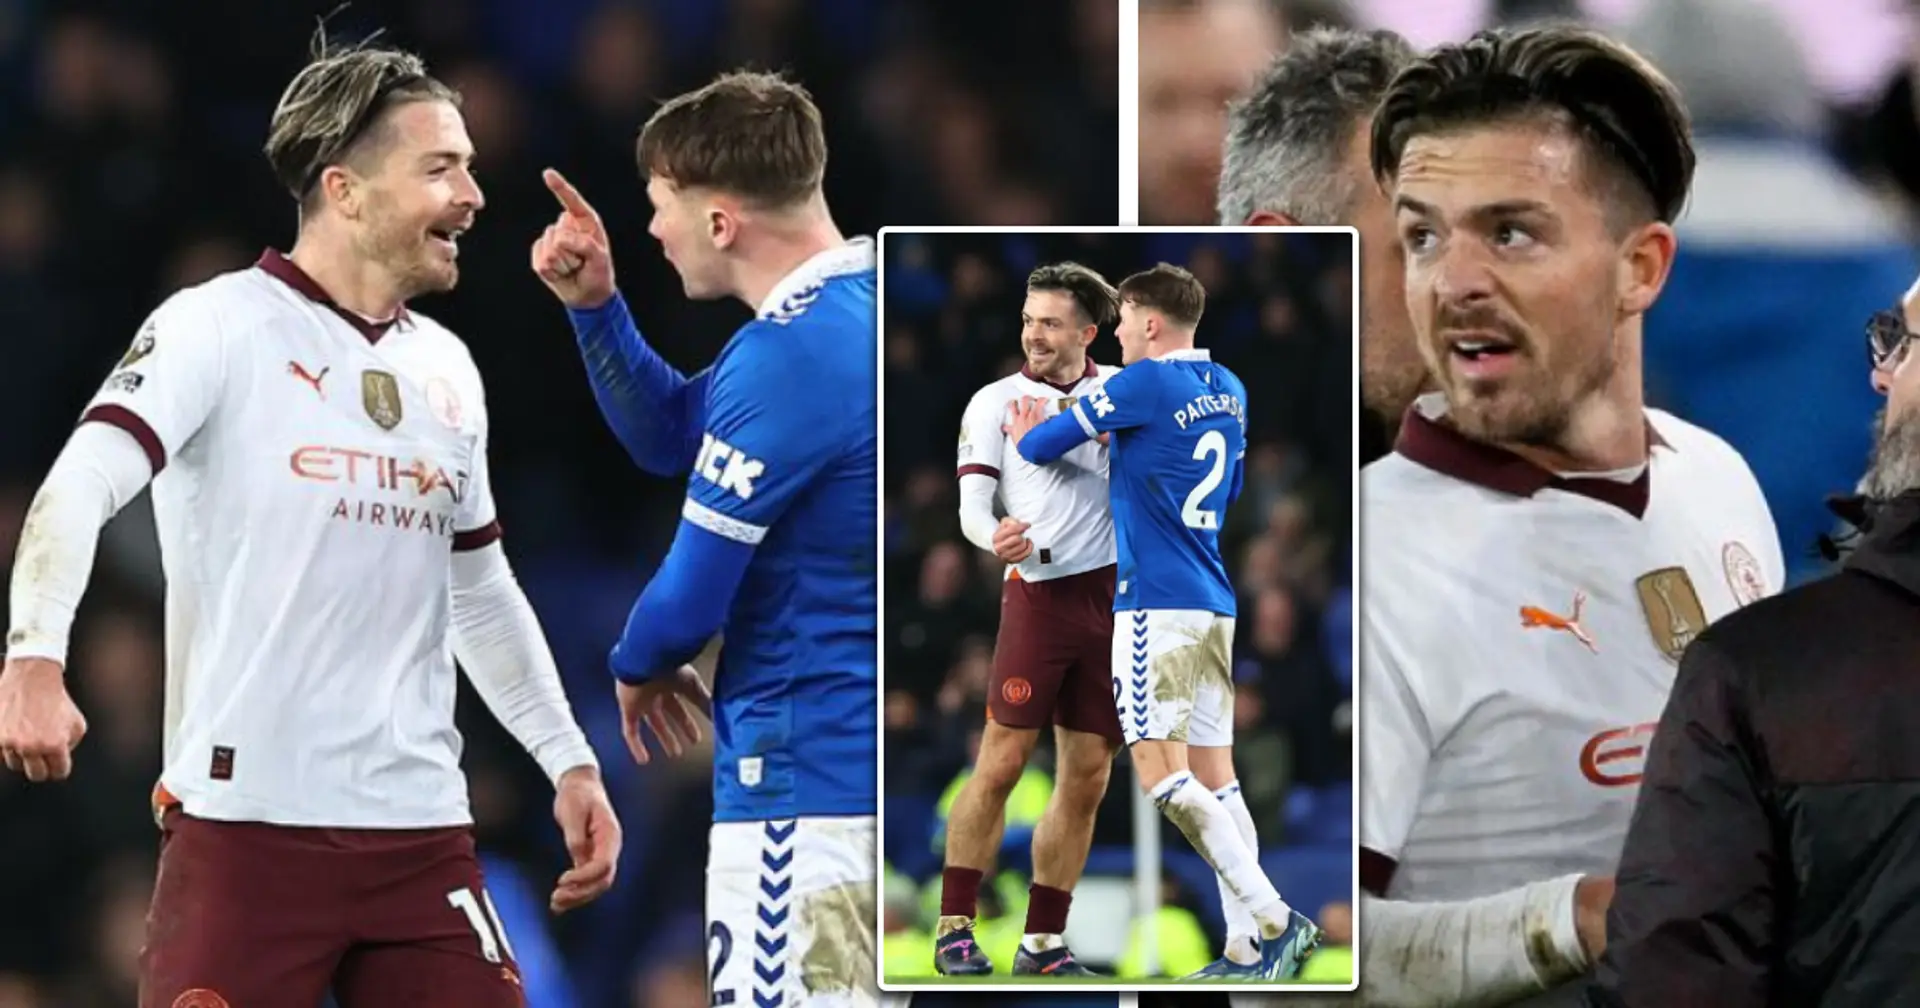 Teammate calls Jack Grealish biggest football trash talker after spat with Everton players